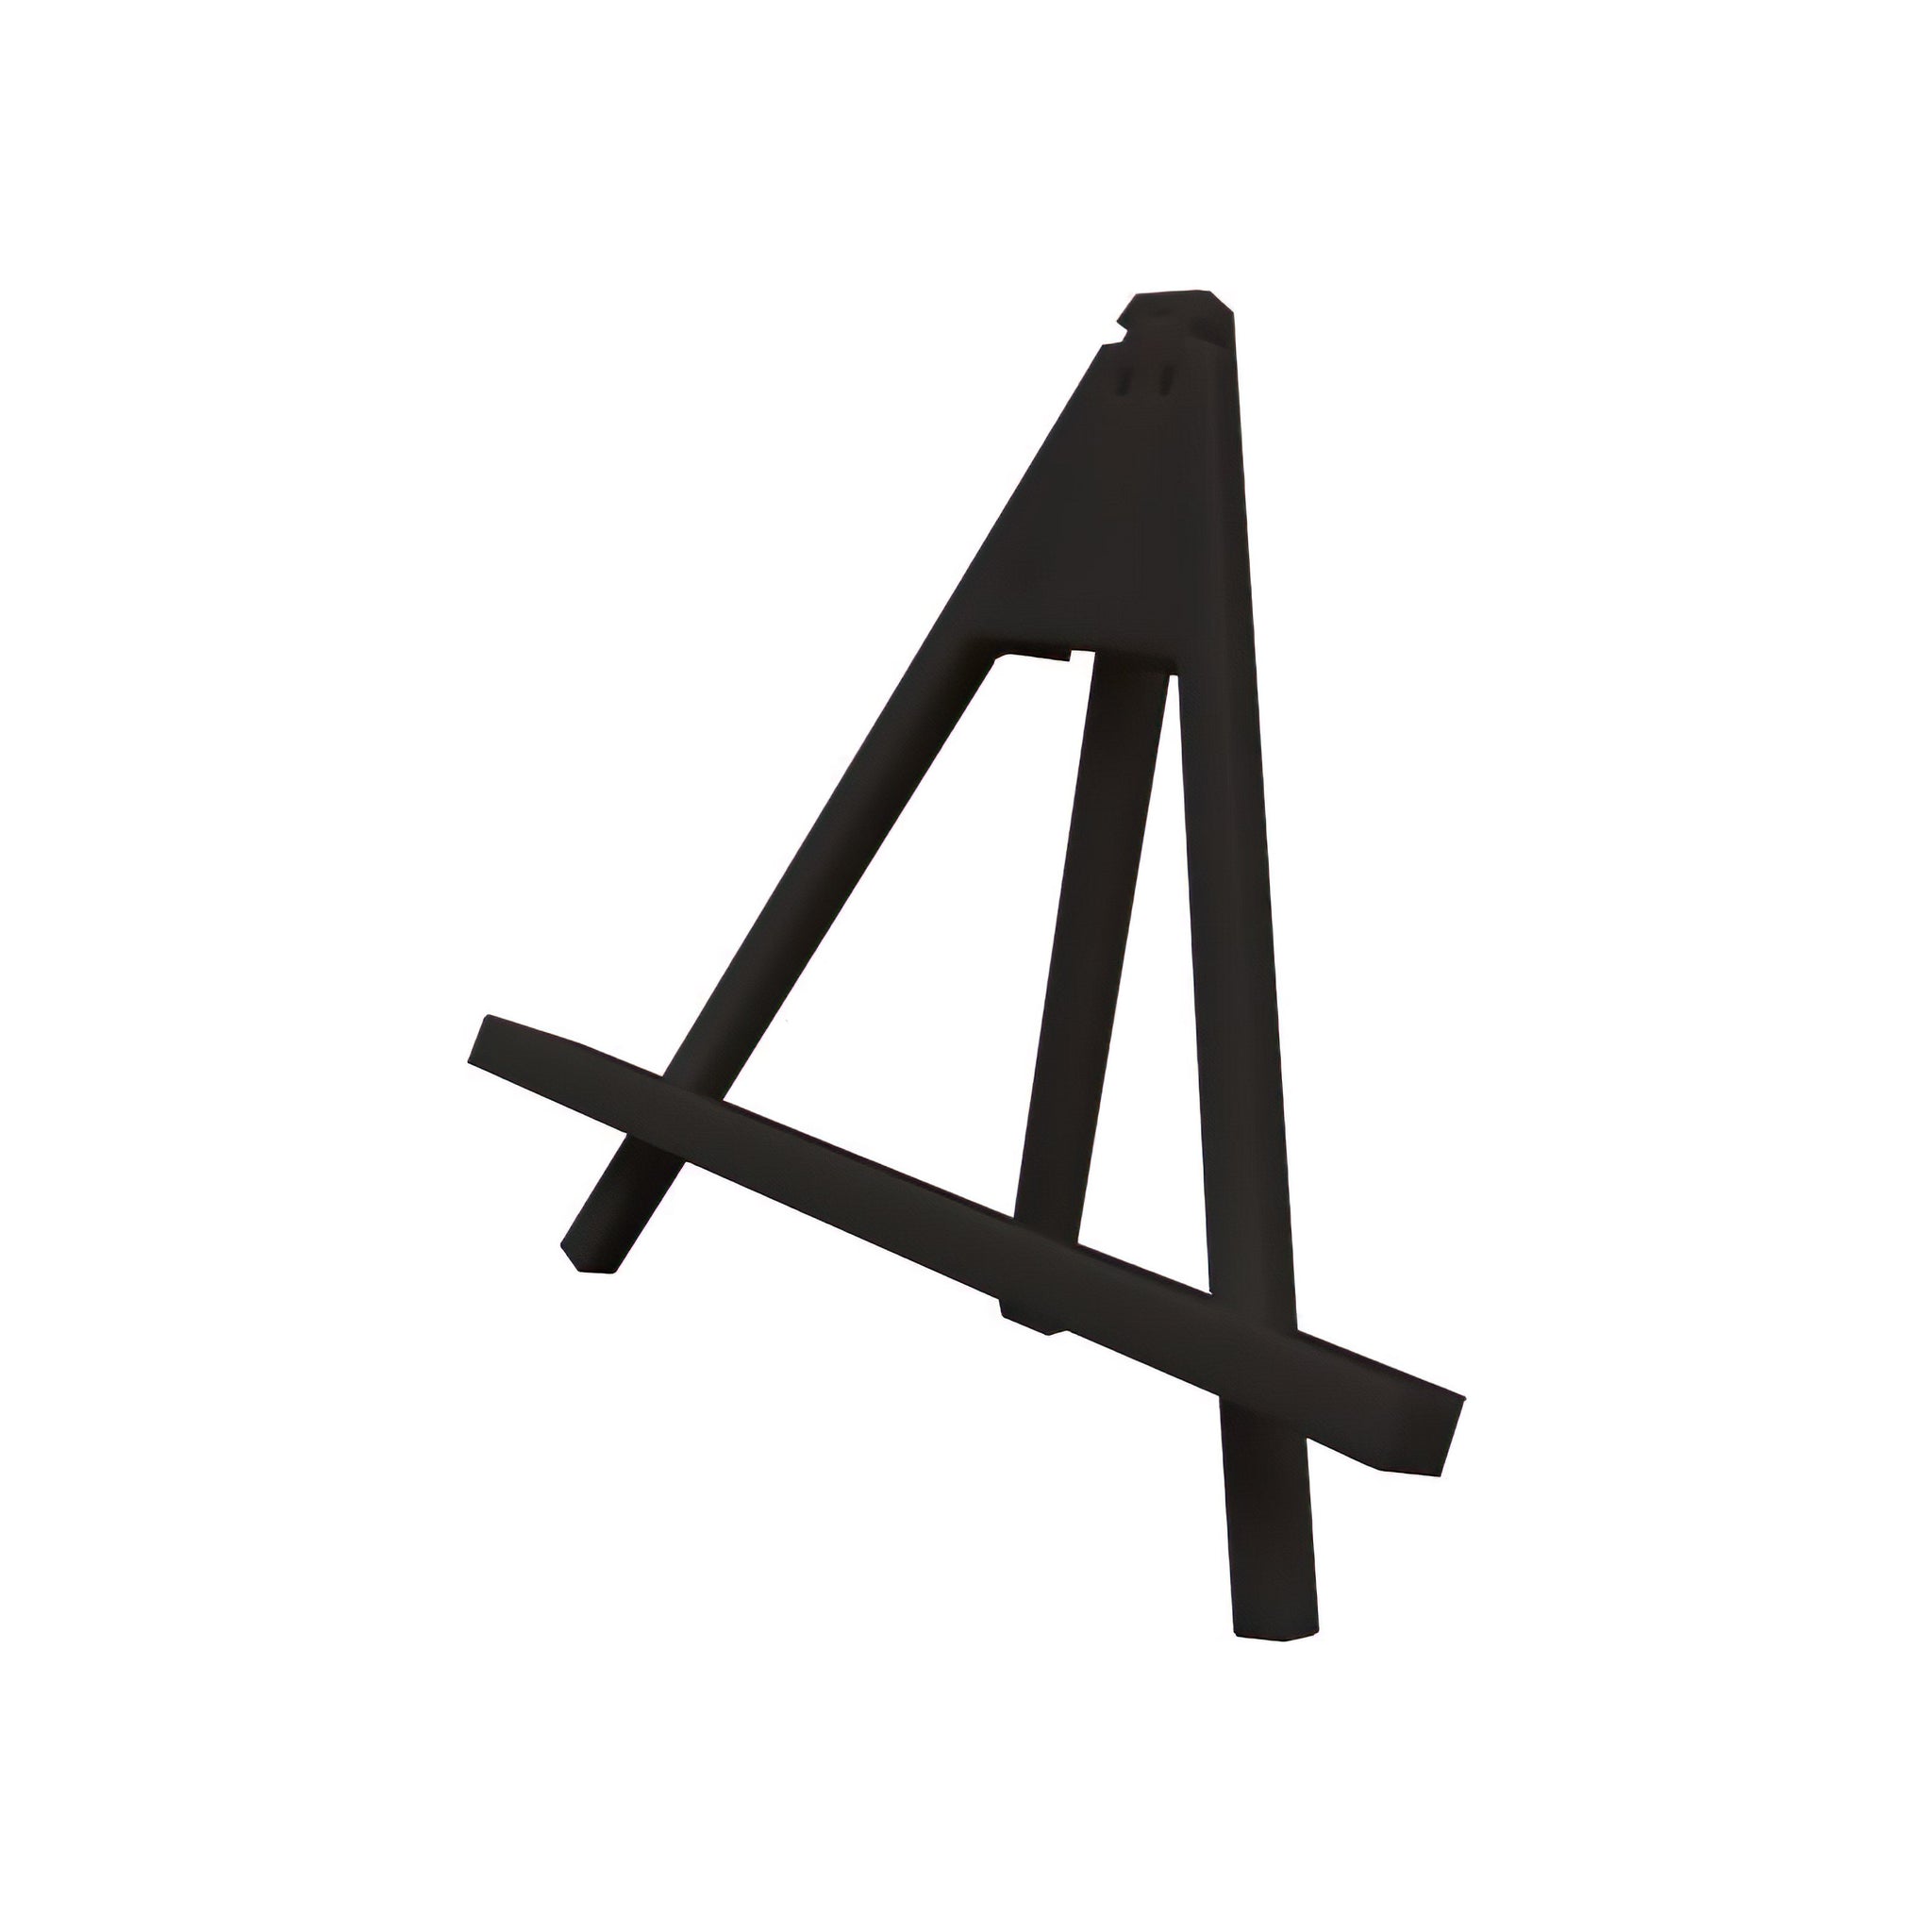 Ensky • Accessories • Artboard Jigsaw Easel Stand / Black　Puzzle Stand